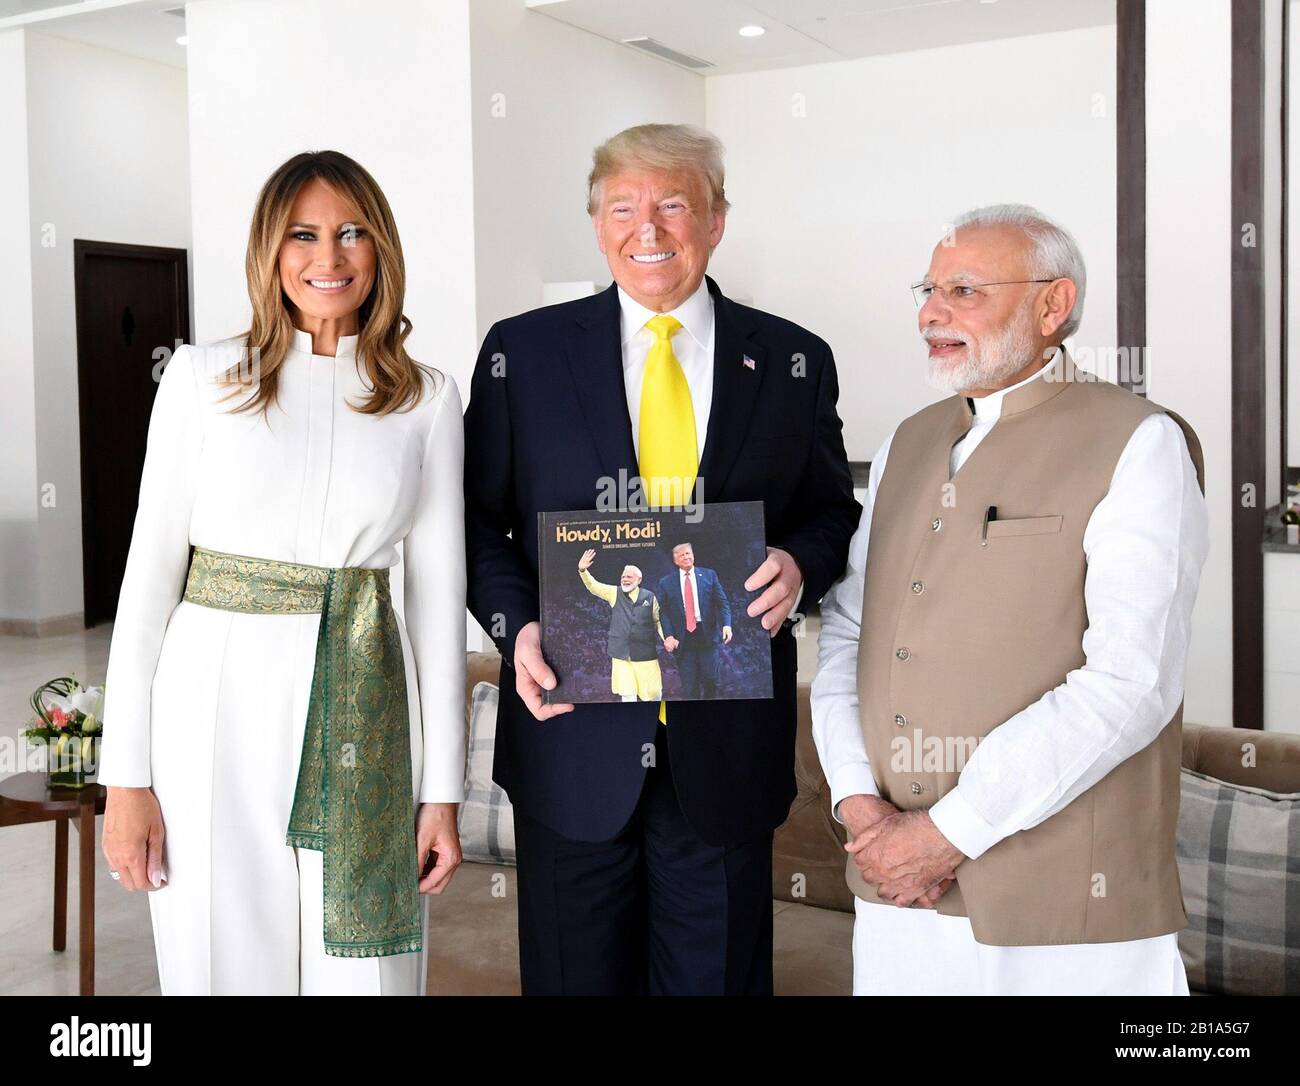 Ahmedabad, India. 24th Feb, 2020. U.S. President Donald Trump and First Lady Melania Trump pose with Indian Prime Minister Narendra Modi on arrival at the Namaste Trump Rally in Motera Stadium February 24, 2020 in Ahmedabad, Gujarat, India. Credit: Shealah Craighead/White House Photo/Alamy Live News Stock Photo